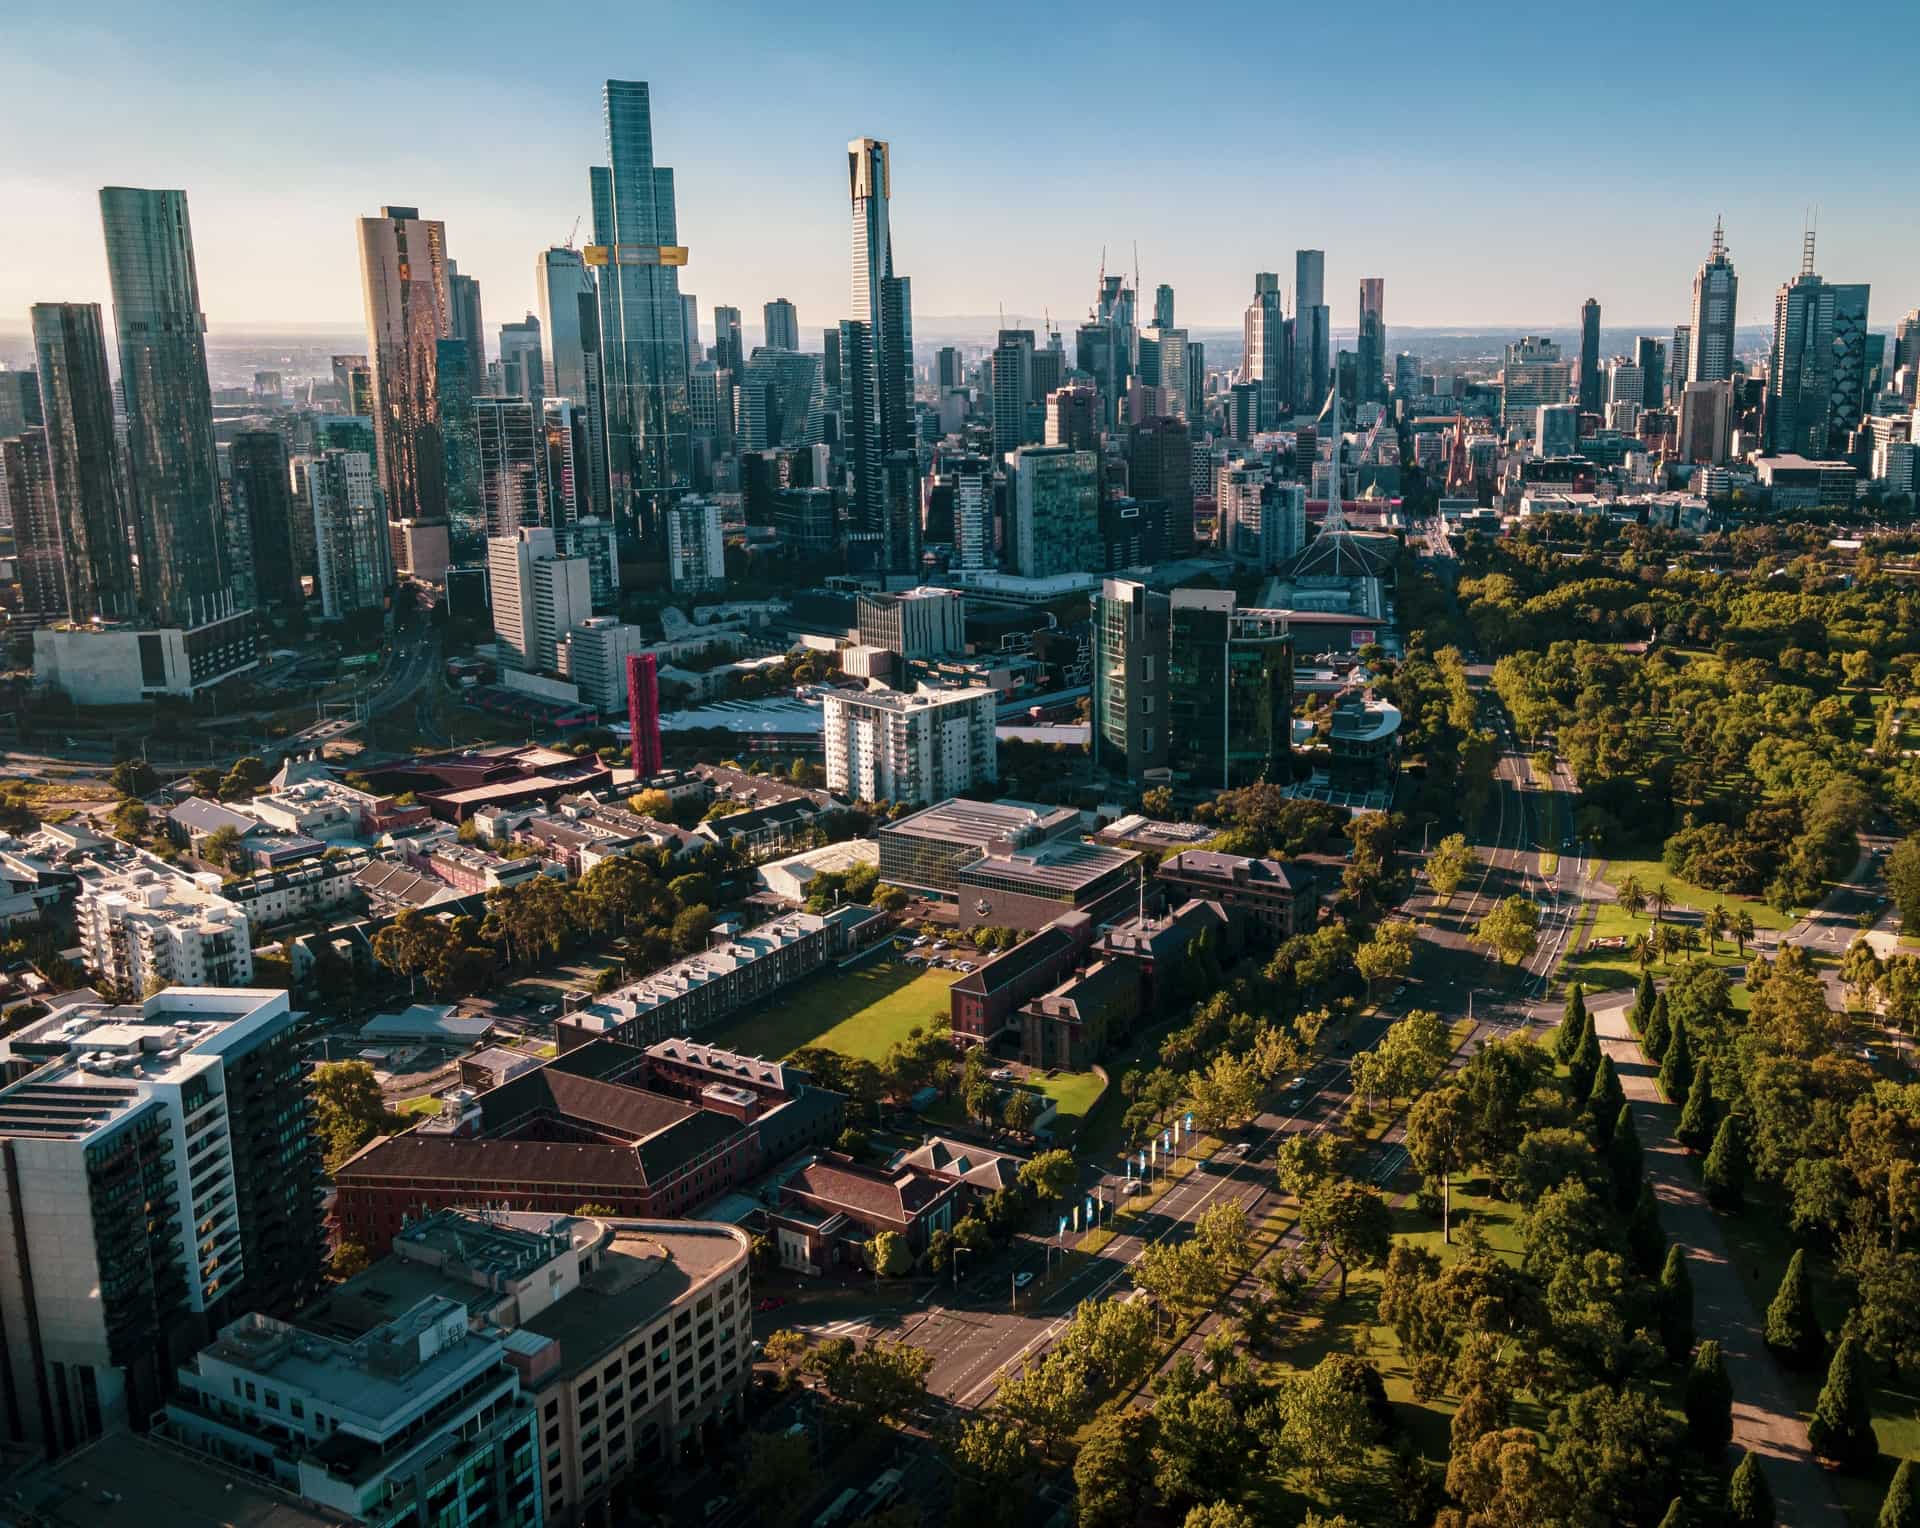 An aerial shot of Melbourne on a sunny day showing skyscrapers, trees, and roads.